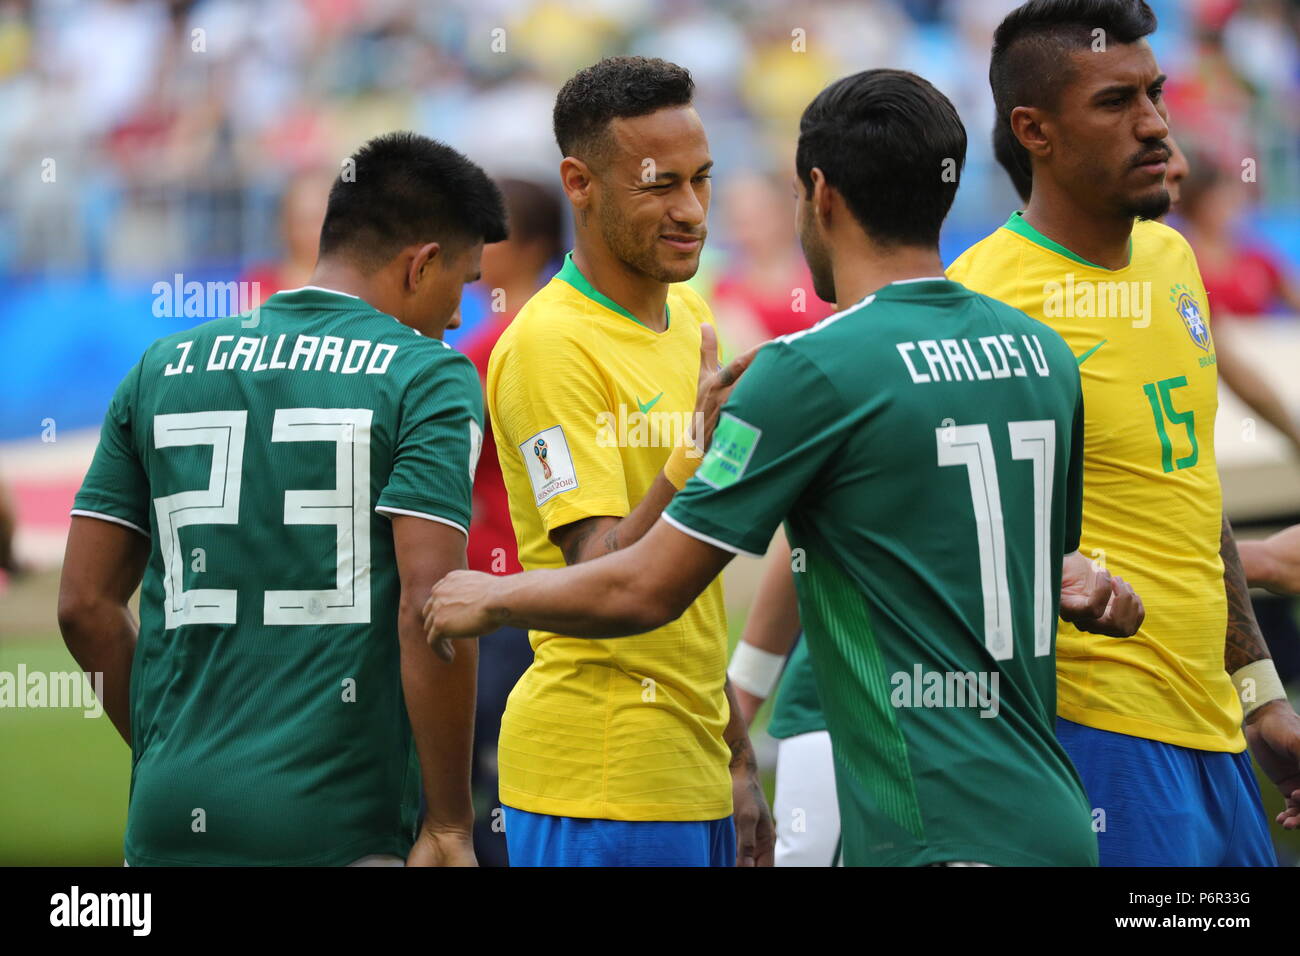 Samara, Russia. 02nd July, 2018. Soccer, World Cup 2018, Final Round- Round of 16: Mexico vs. Brazil at the Samara Stadium: Brazil's Neymar (2nd from the left) and Paulinho f(r) welcome Mexico's Jesus Gallardo (l) and Carlos Vela (r) before the game. Credit: Christian Charisius/dpa/Alamy Live News Stock Photo